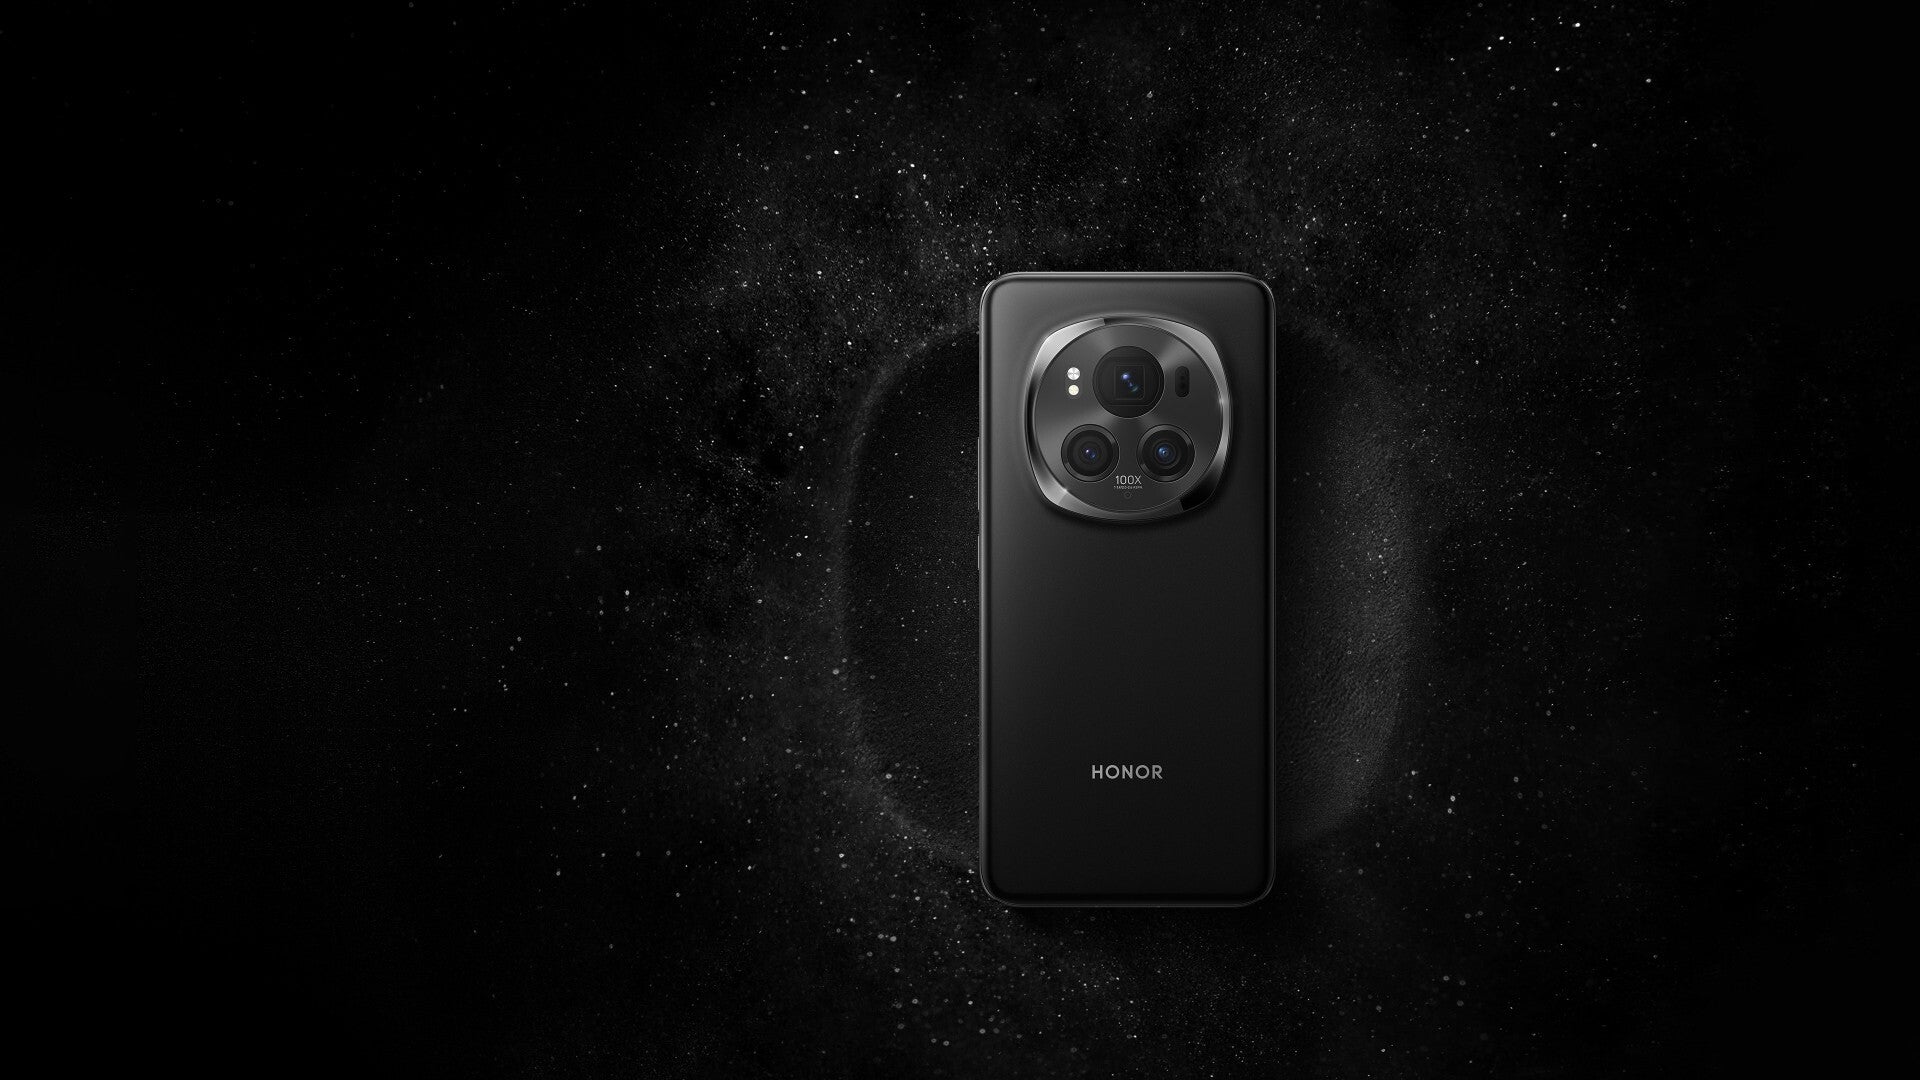 The Honor Magic 6 Pro is now official with a magical camera, paranormal battery and AI